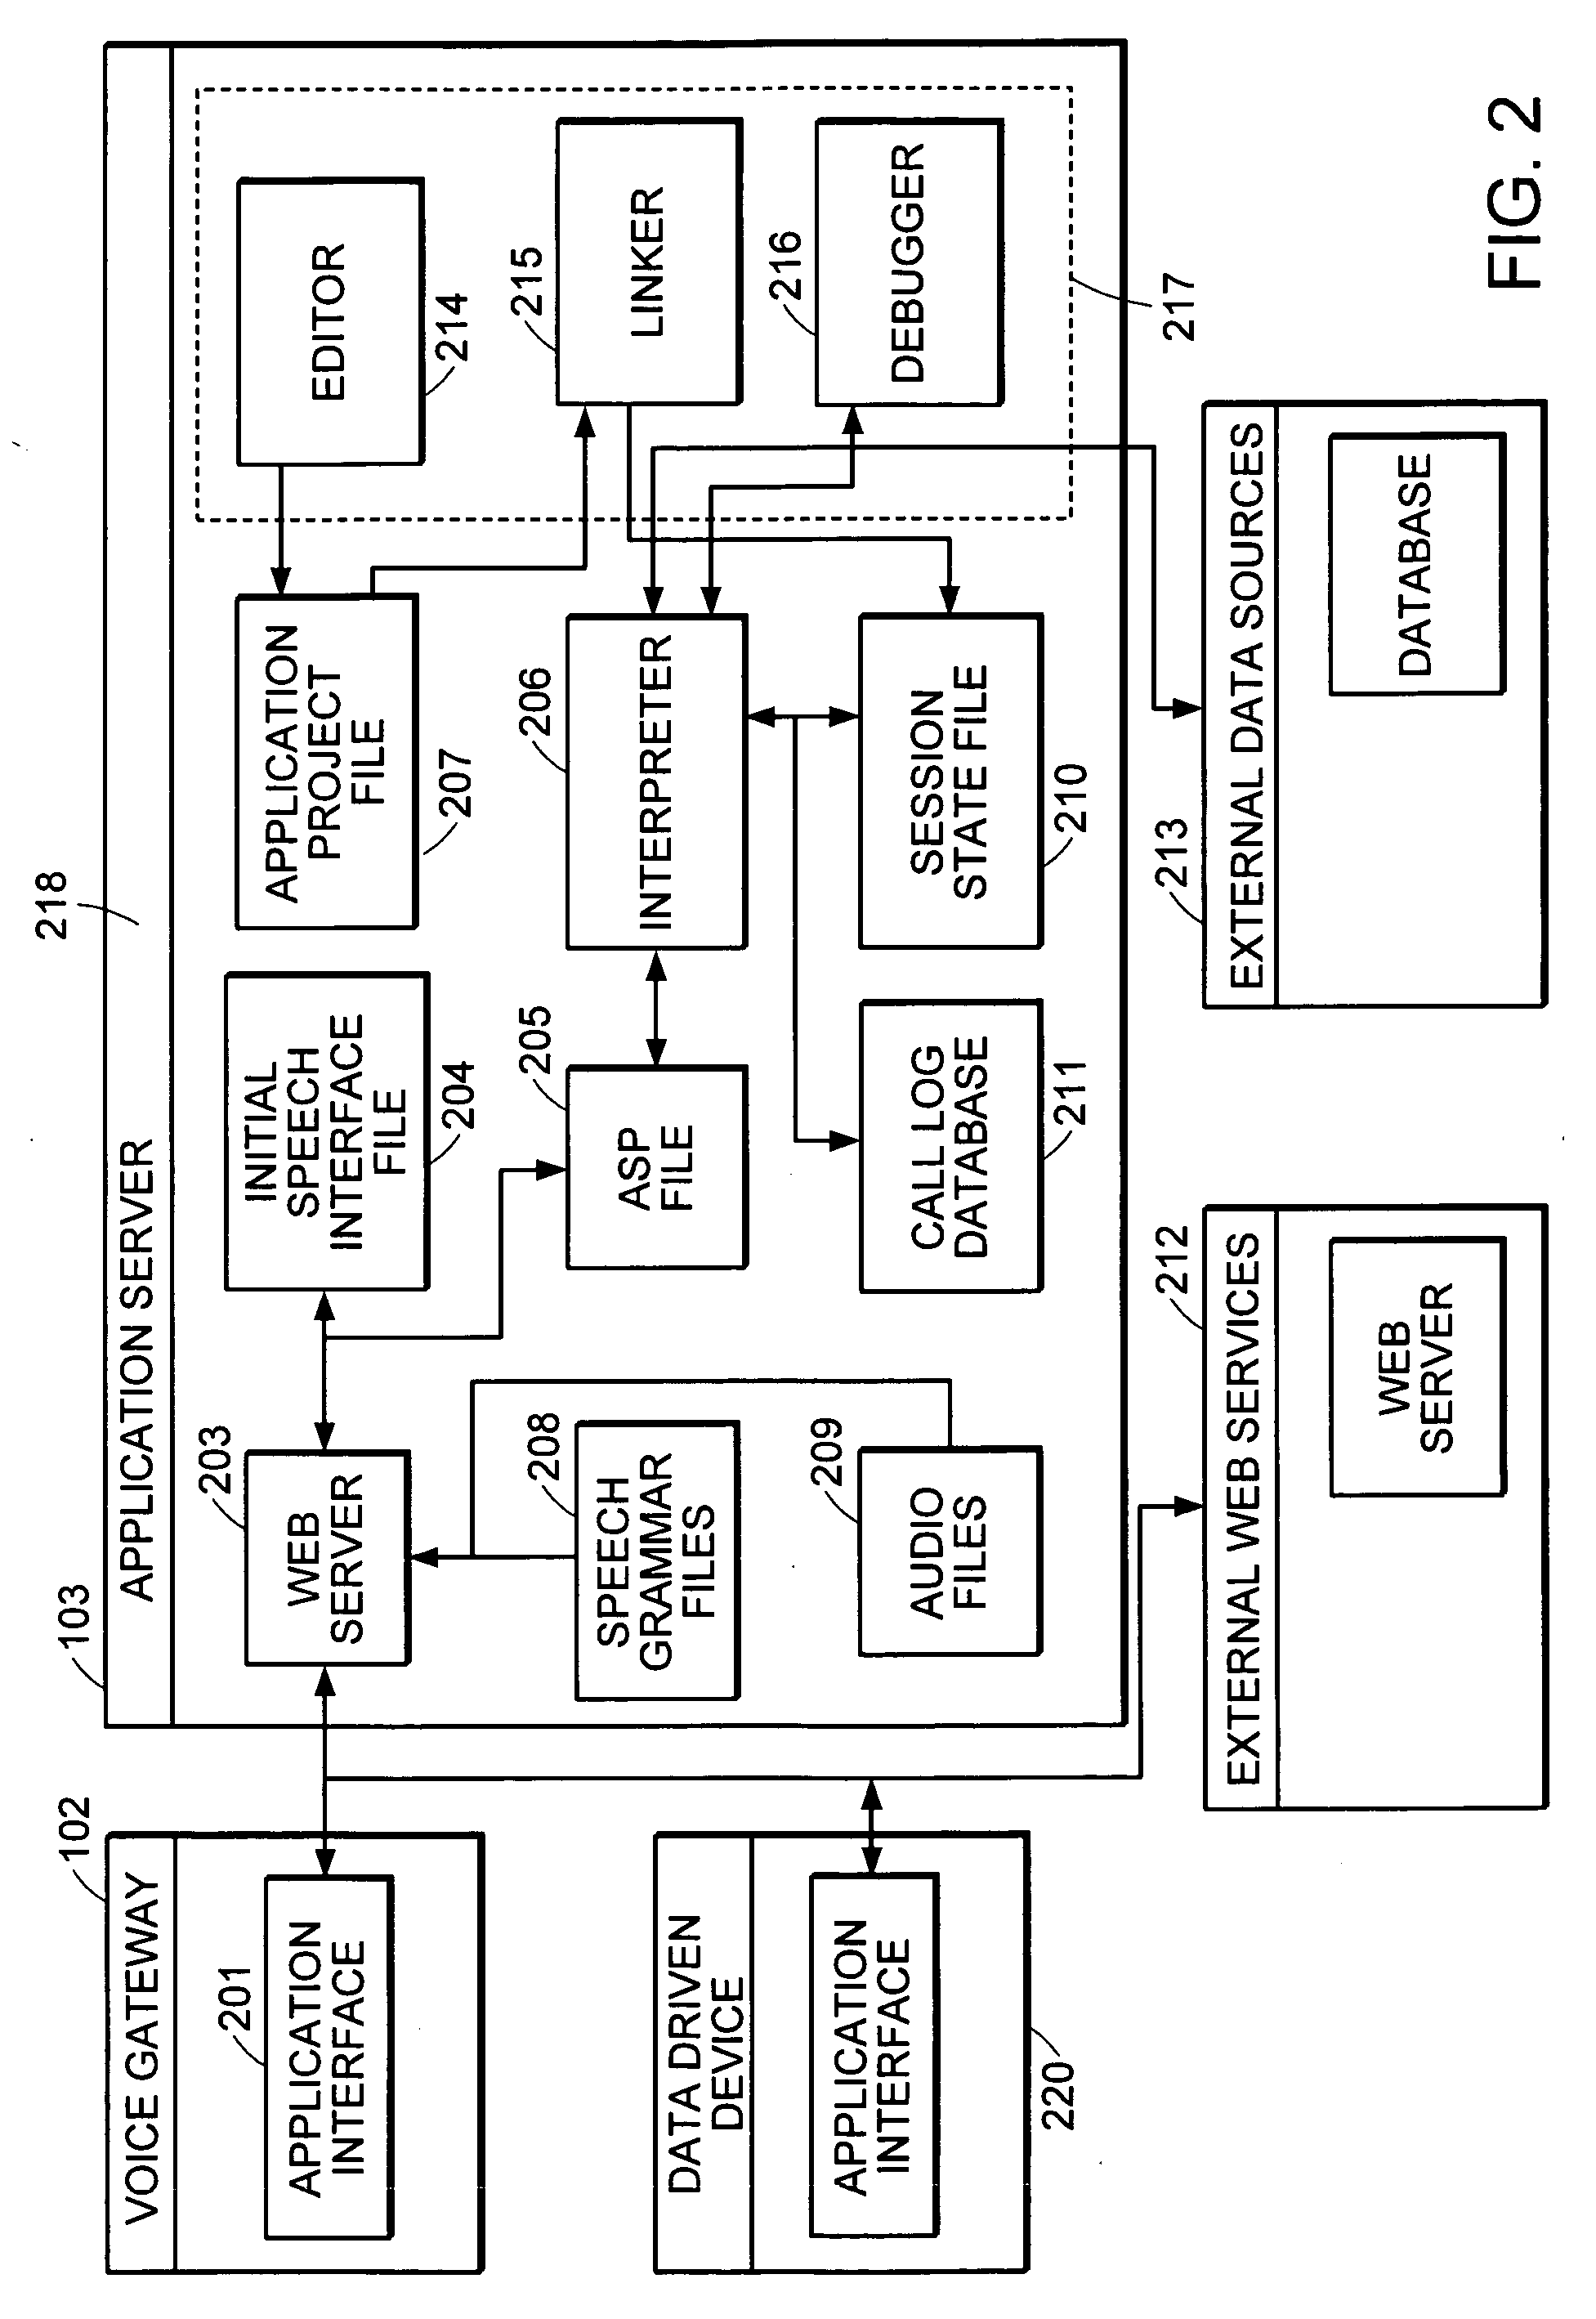 System, method, and programming language for developing and running dialogs between a user and a virtual agent